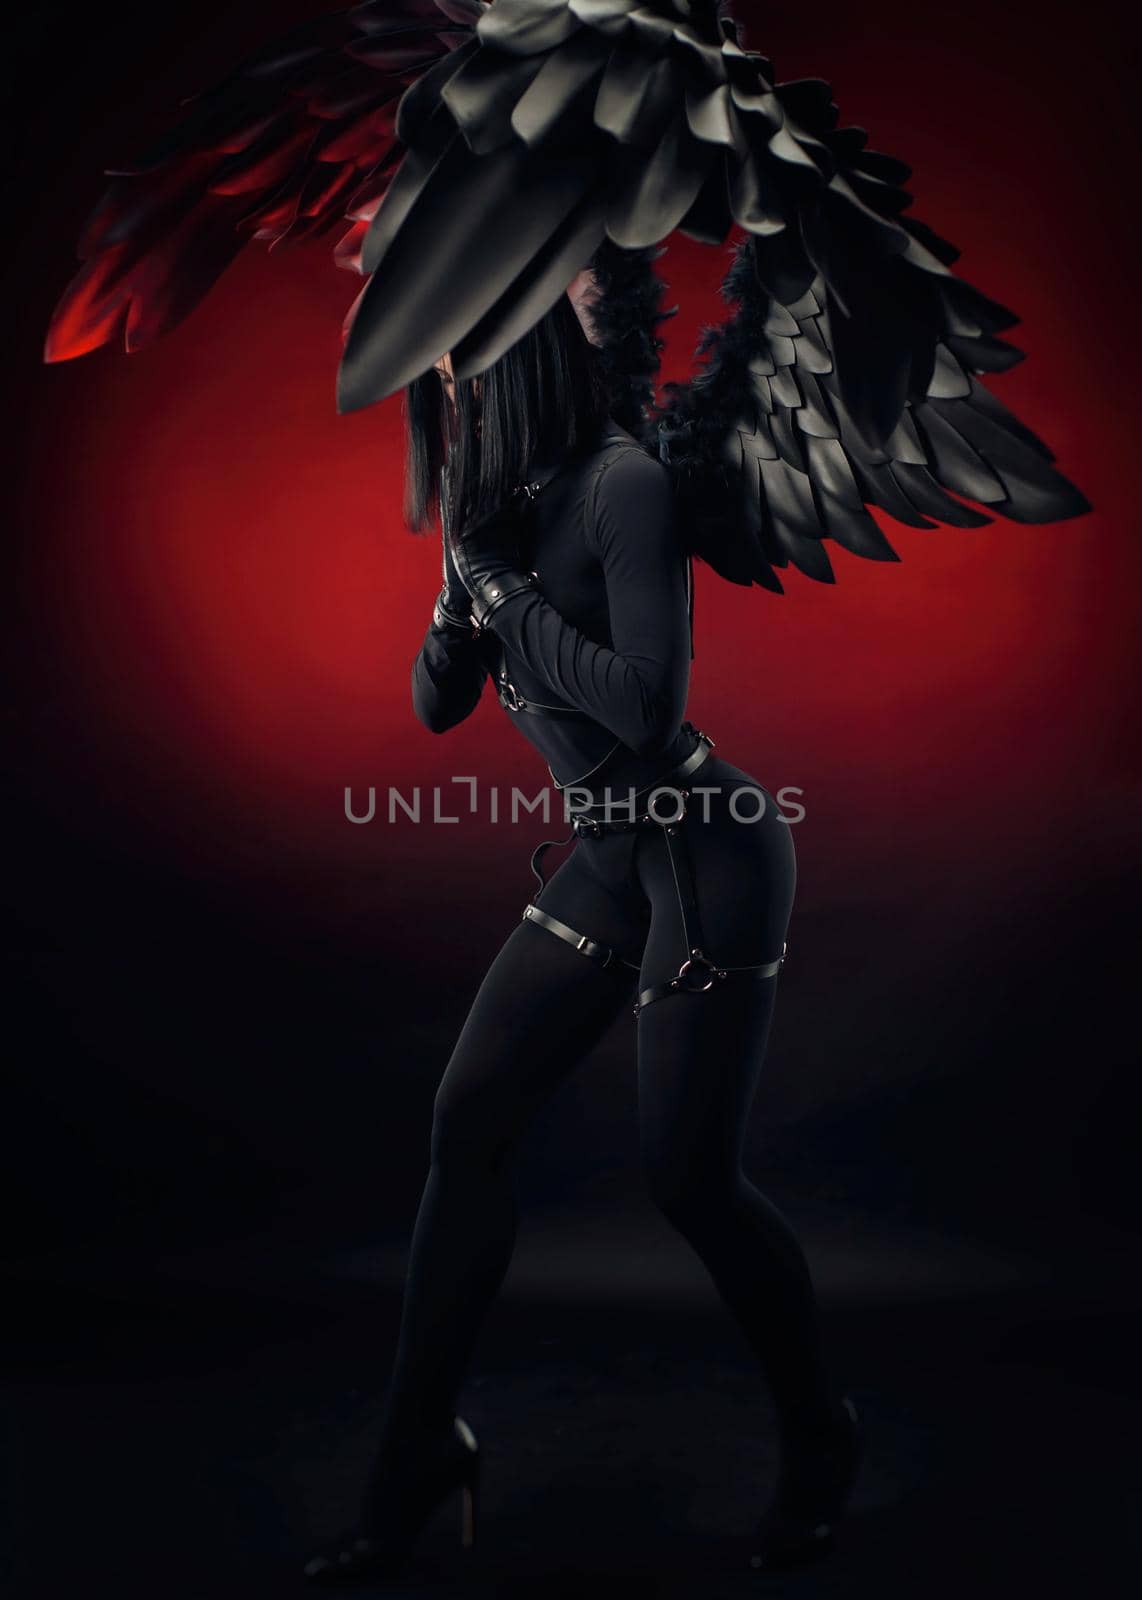 the woman in a black bodysuit with leather straps and black wings on a dark red background